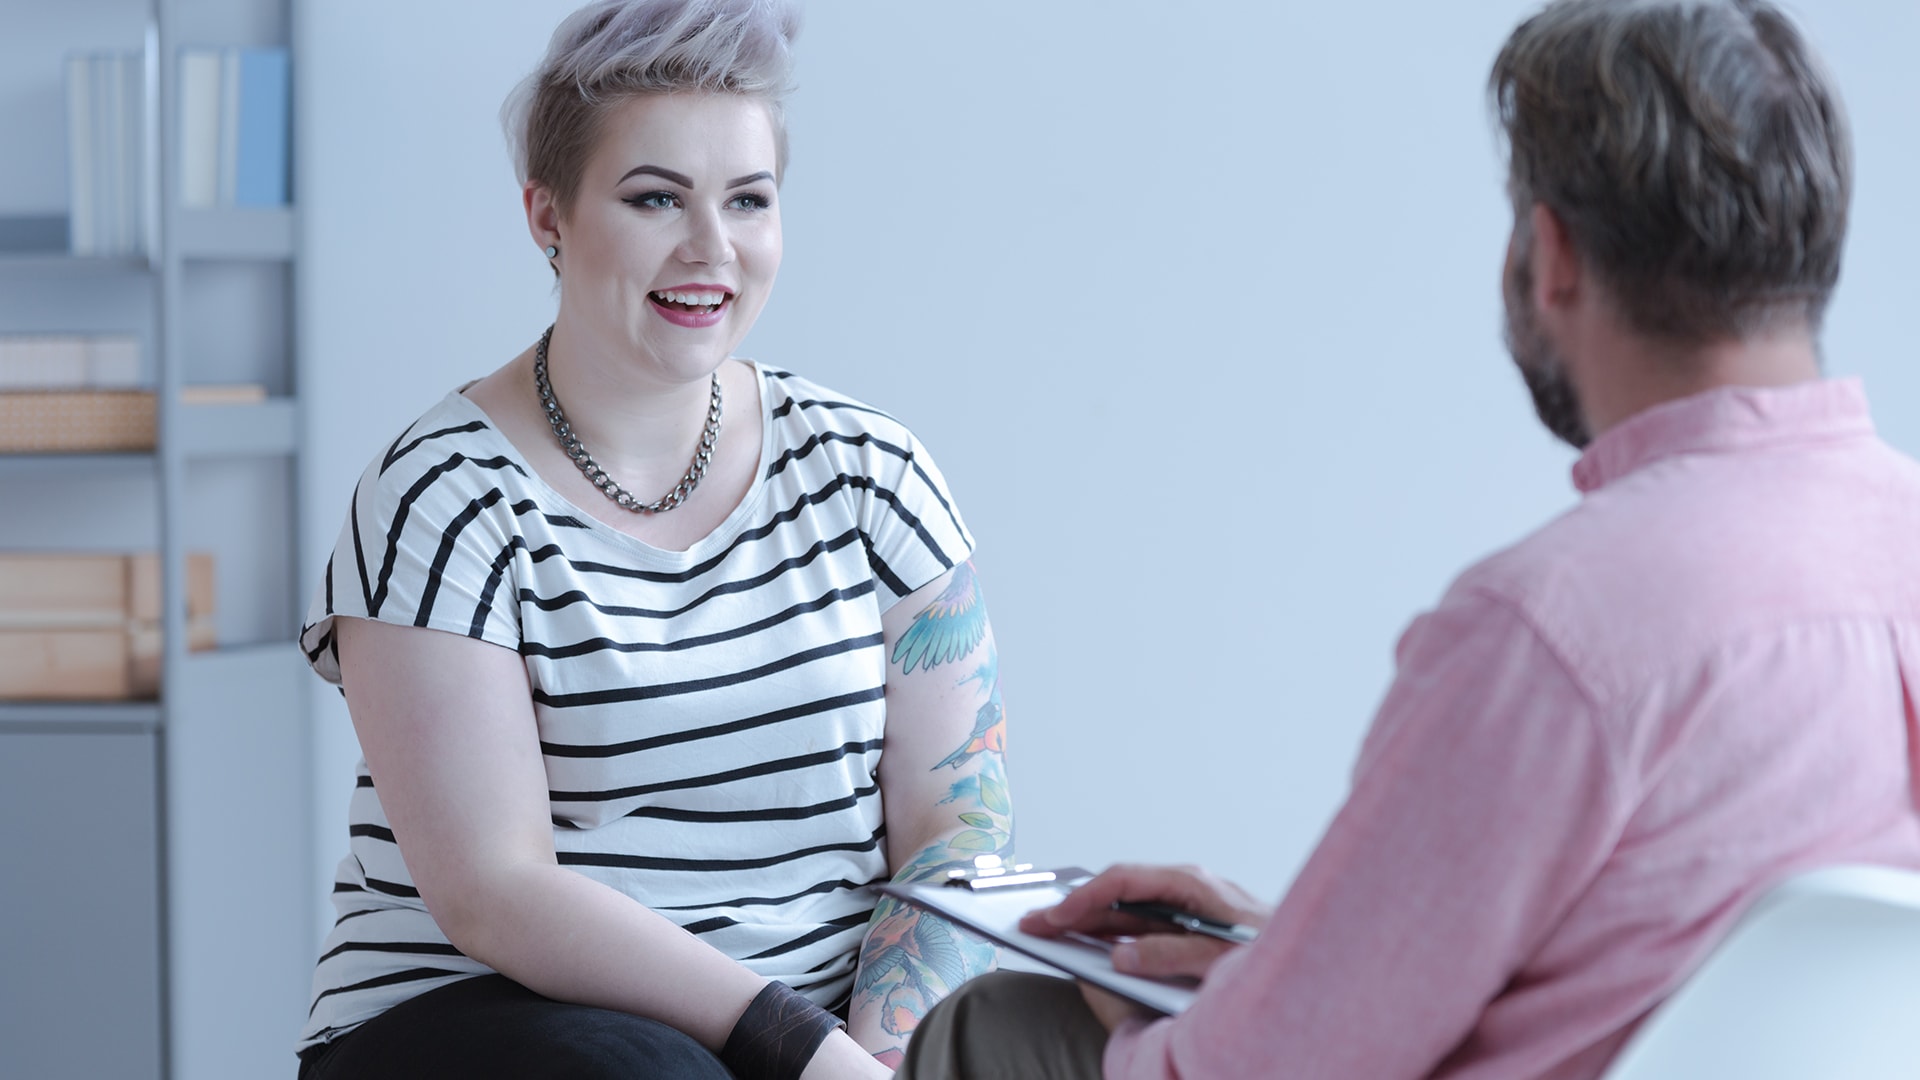 Client with short hair and tattoos smiling while talking with a health professional holding a clipboard